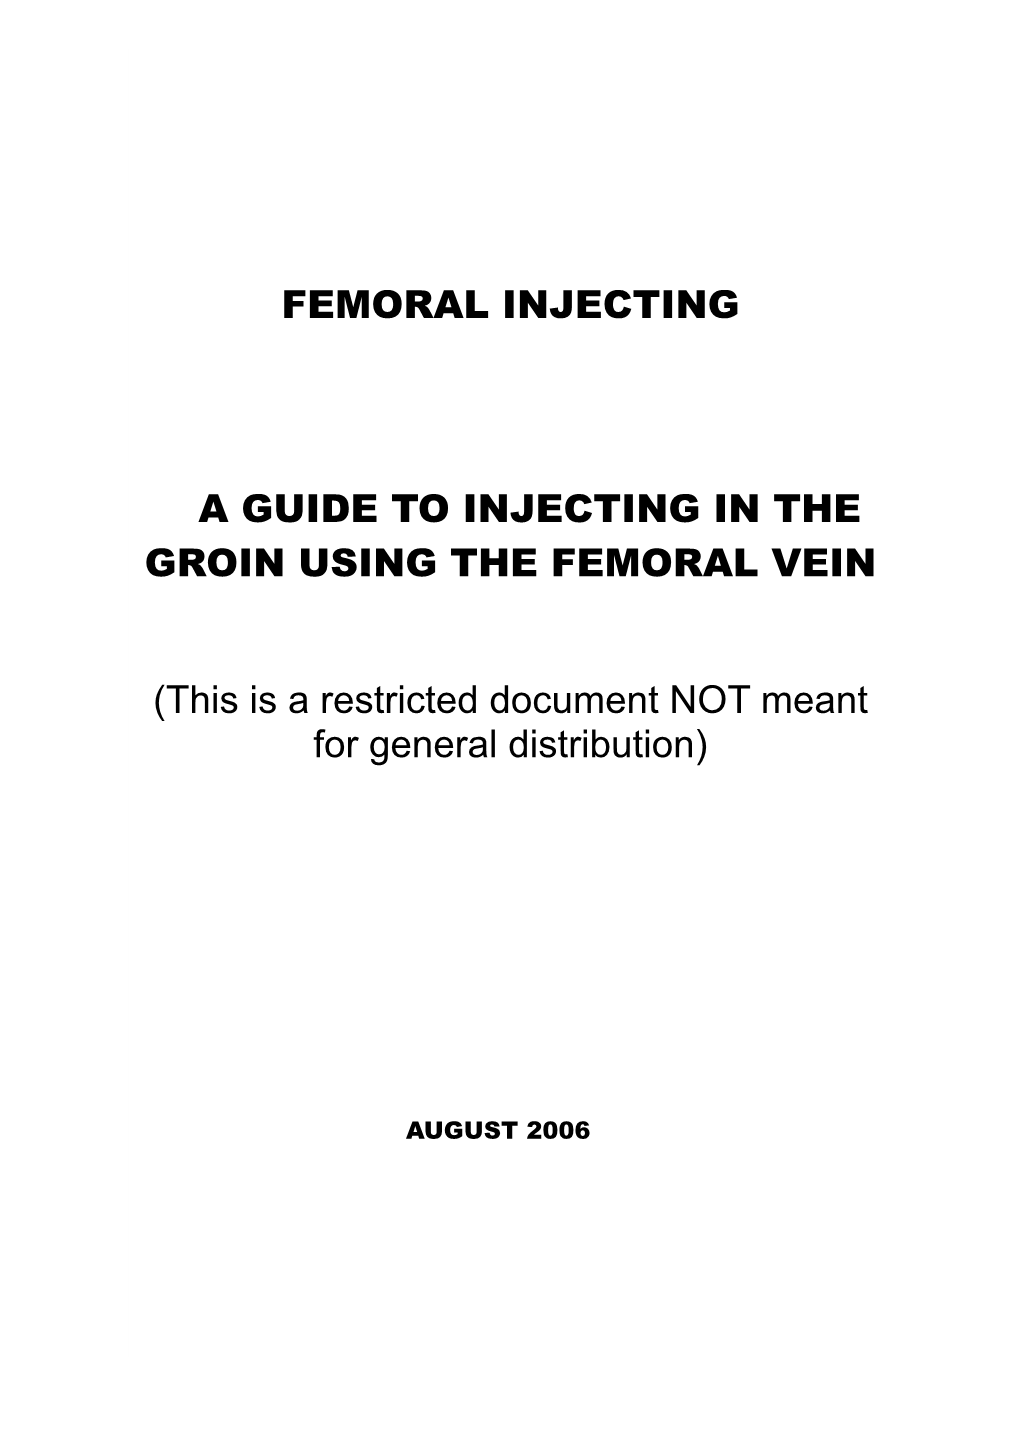 Femoral Injecting Guide